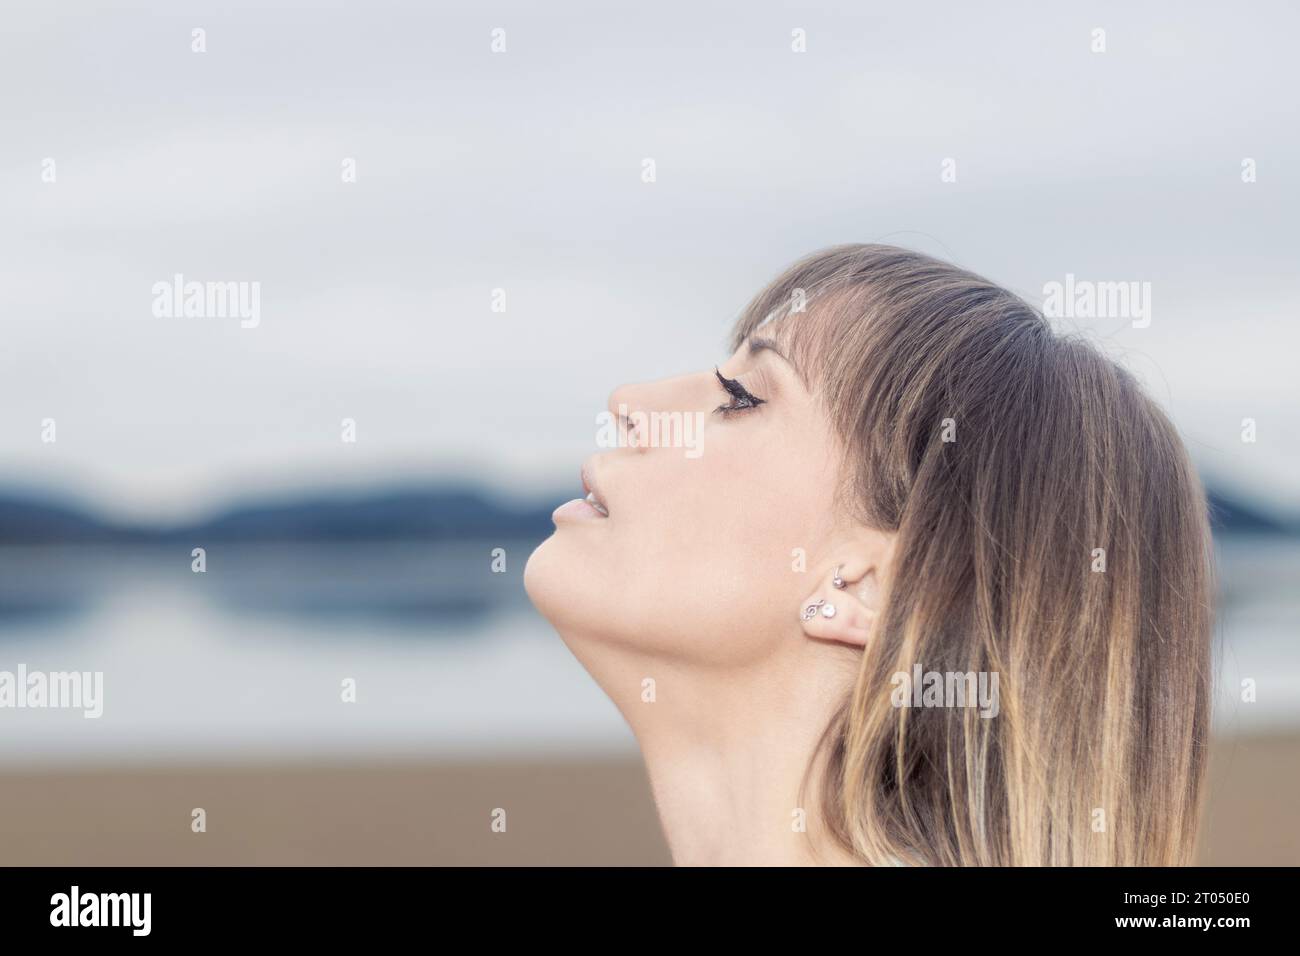 Ethereal Beauty: Graceful Woman's Dreamy Gaze into the Infinite Horizon Captures the Essence of Hope Stock Photo